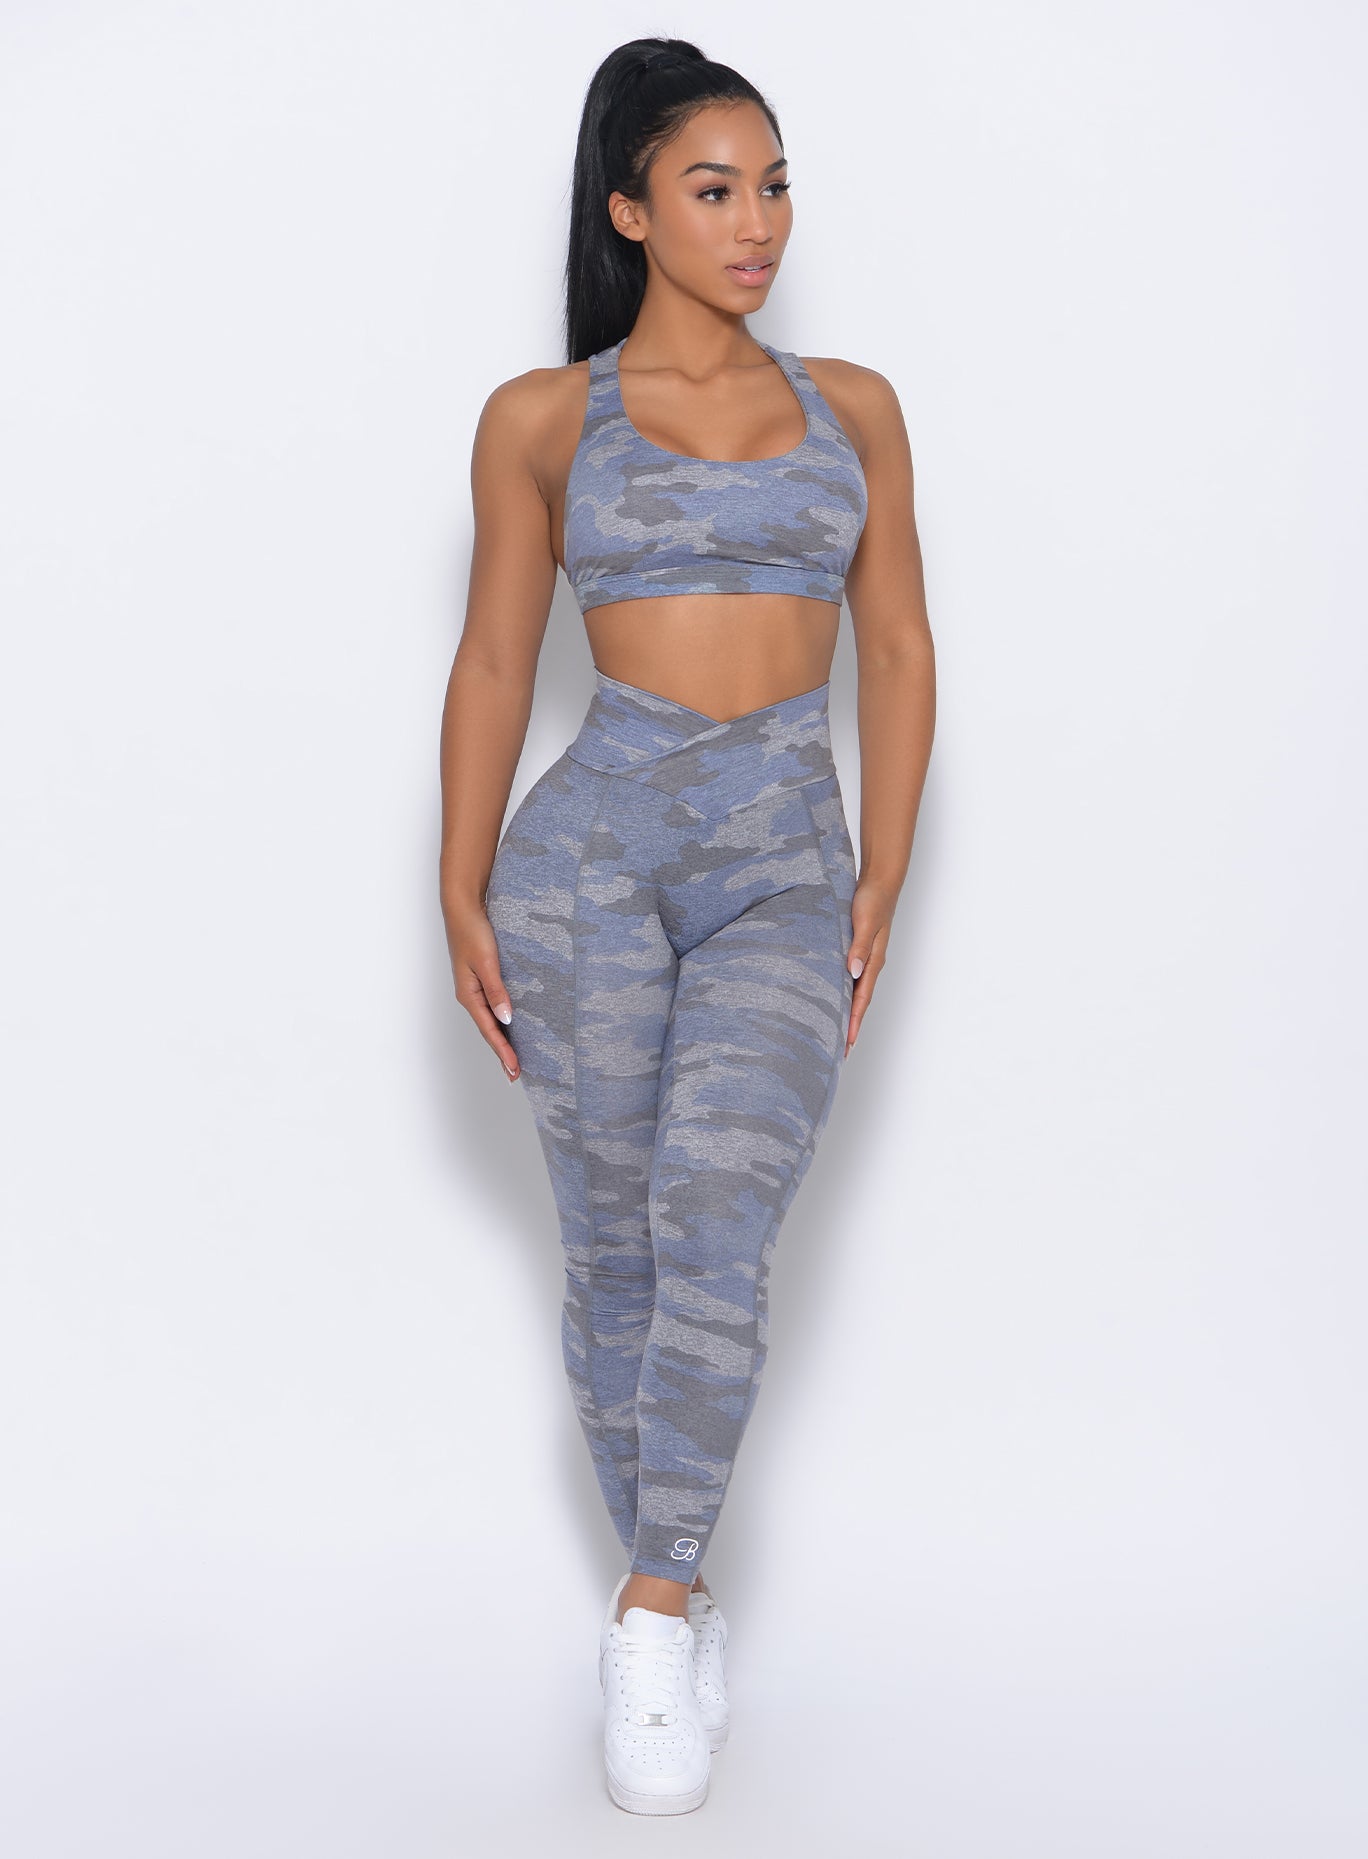 Front profile view of the model in our Brazilian contour leggings in silver camo color and a matching bra  